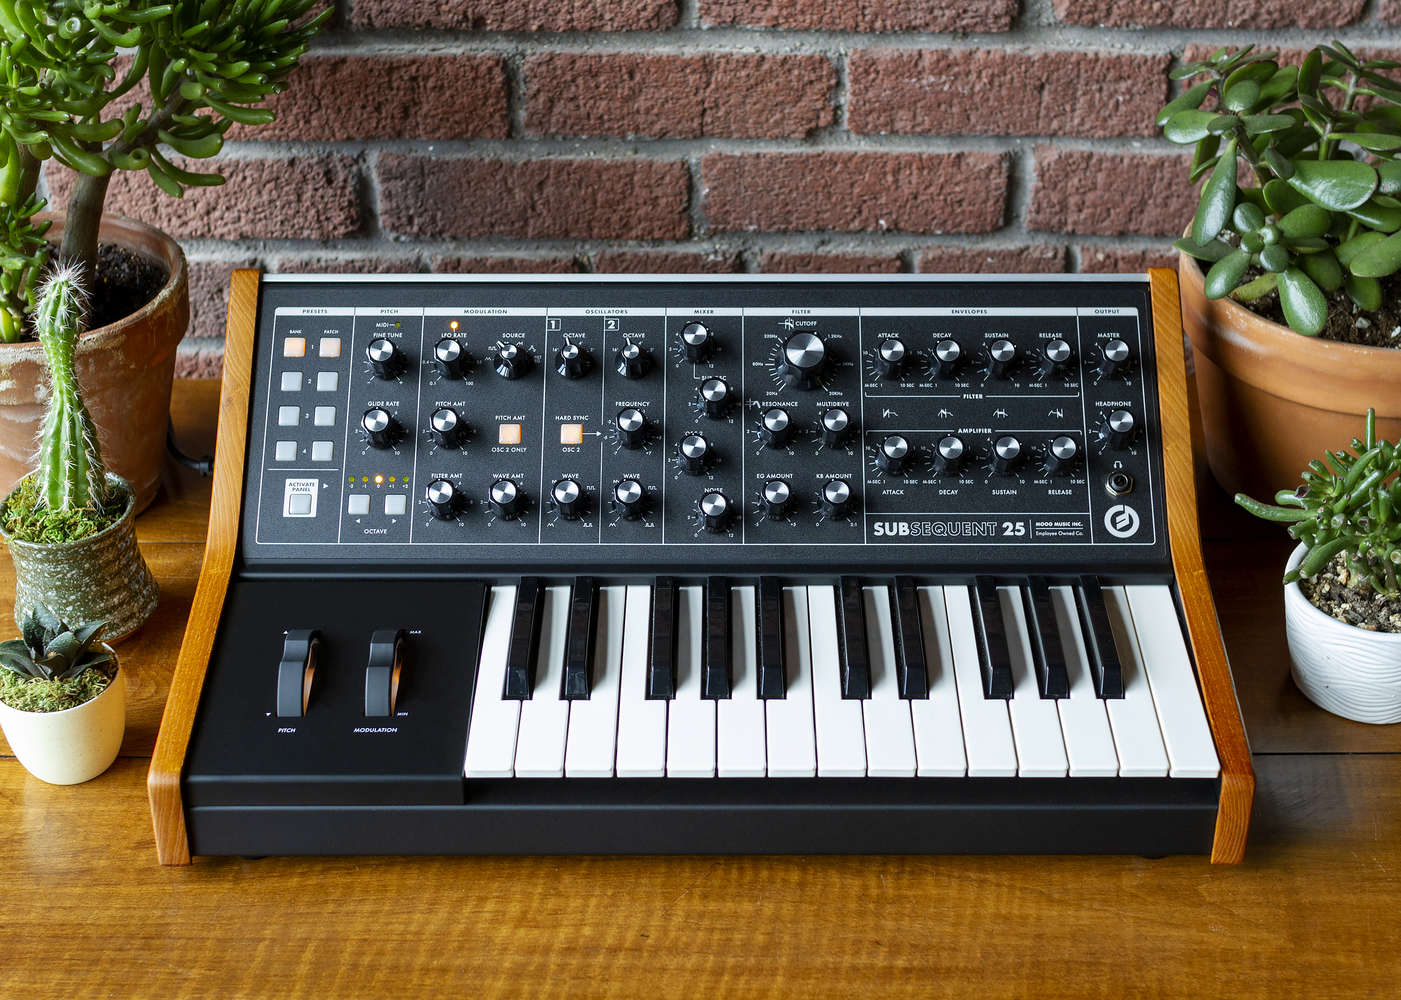 Introducing Subsequent 25 | Moog